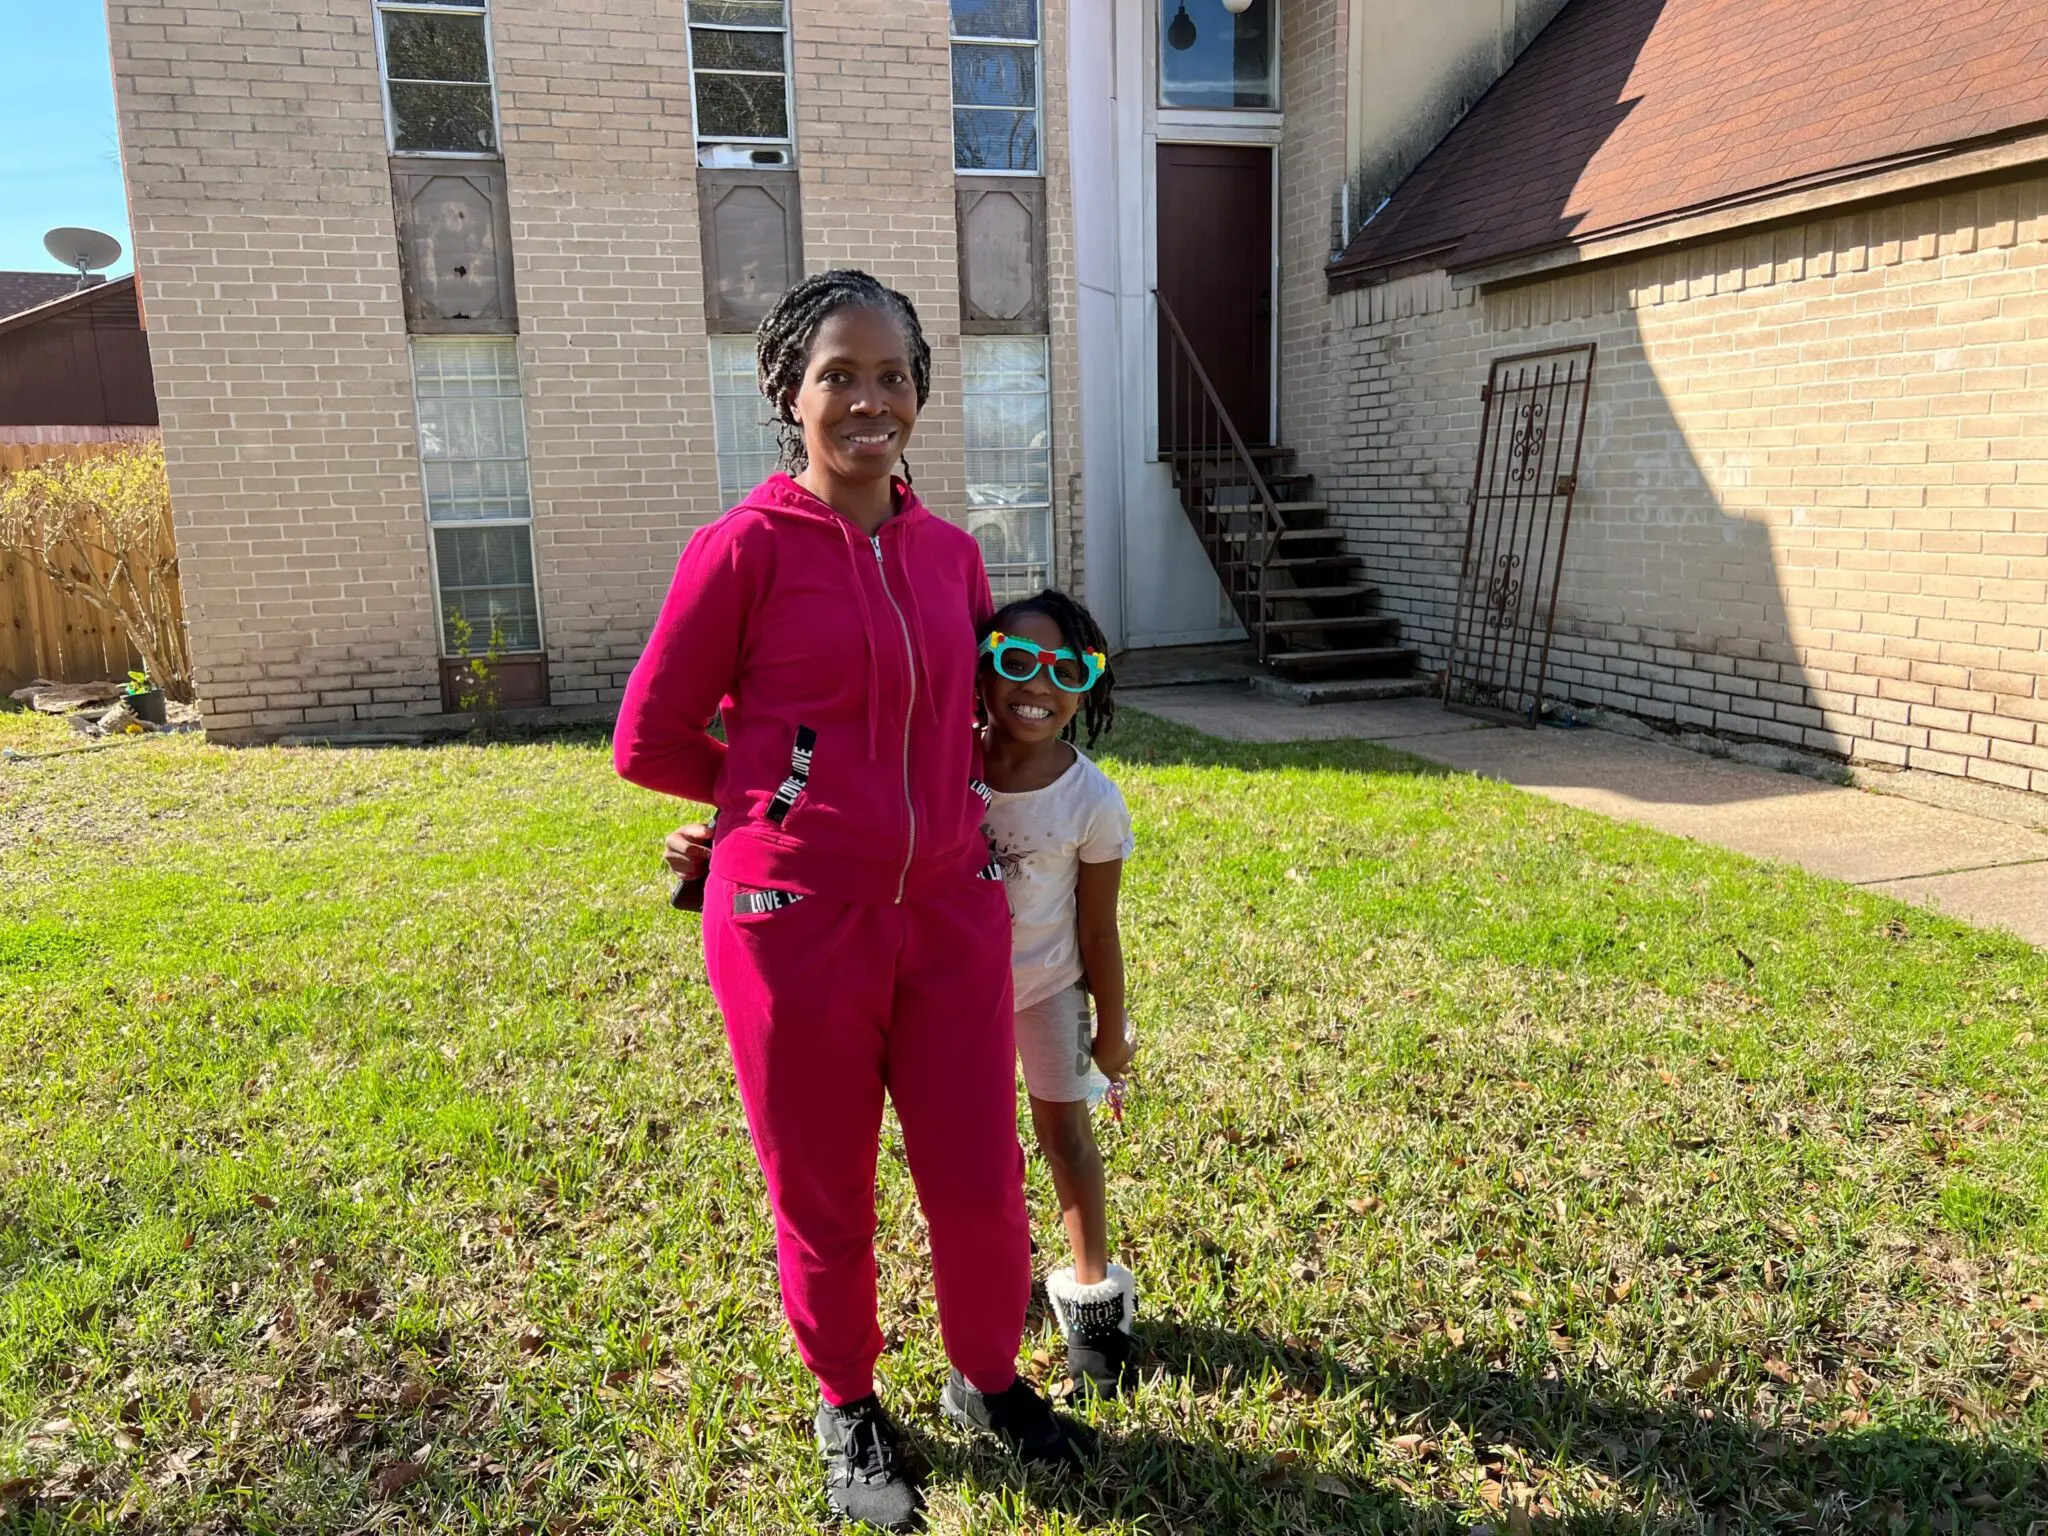 A woman stands on a lawn in which a brick building is seen the background. She's smiling and next to her is a young girl wearing teal-framed sunglasses. Both are smiling for the camera. This is Kimberly Lee and her granddaughter.